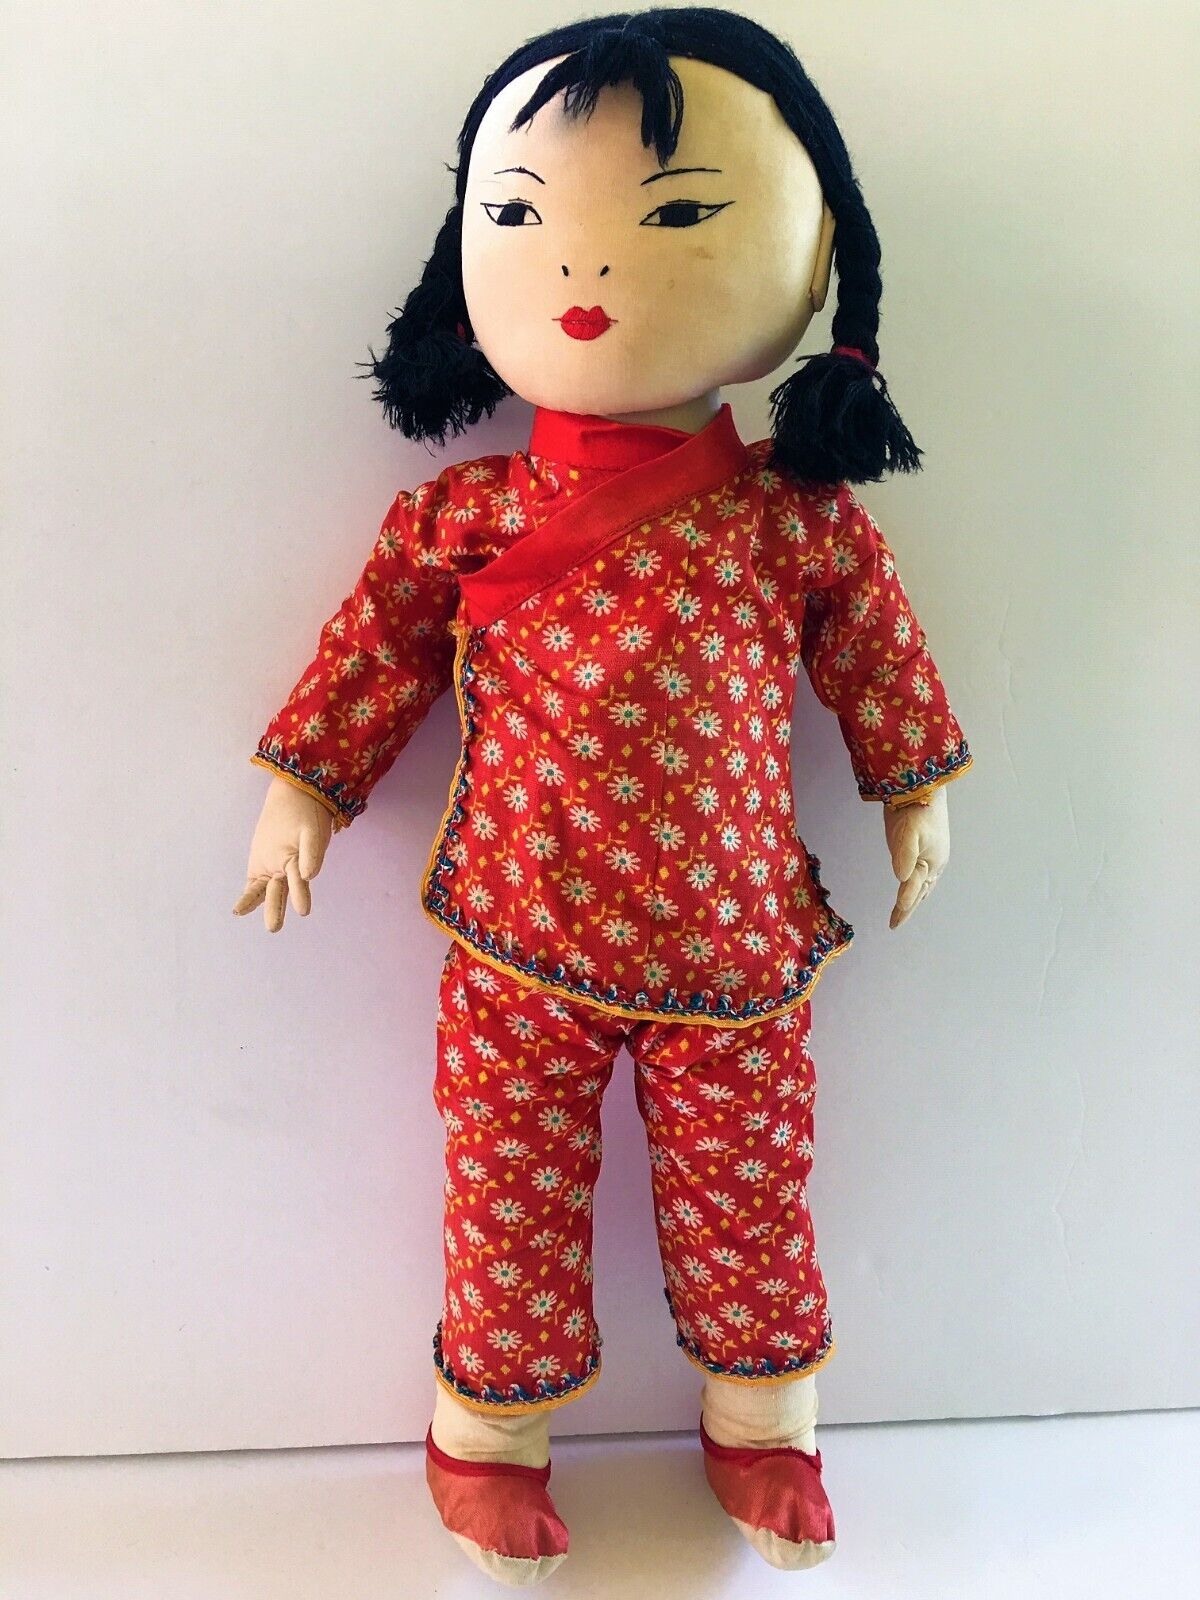 Vintage 18" Chinese Girl Cloth Doll Handmade Embroidered Hong Kong Ada Lum Style